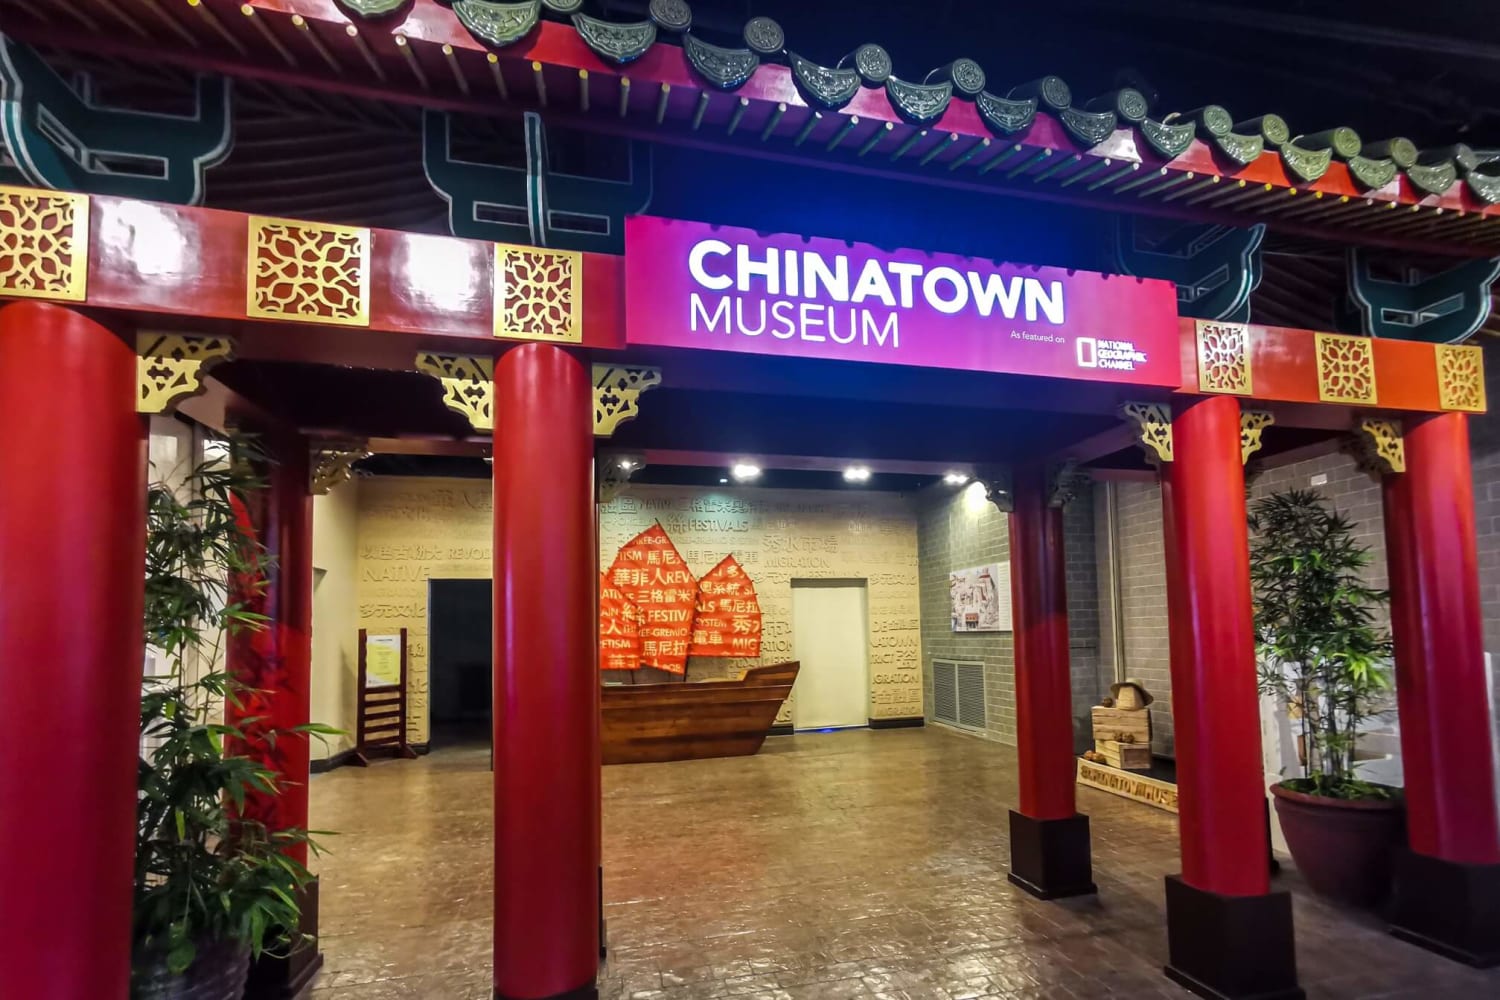 Discover Binondo's Colorful and Timeless History at Chinatown Museum